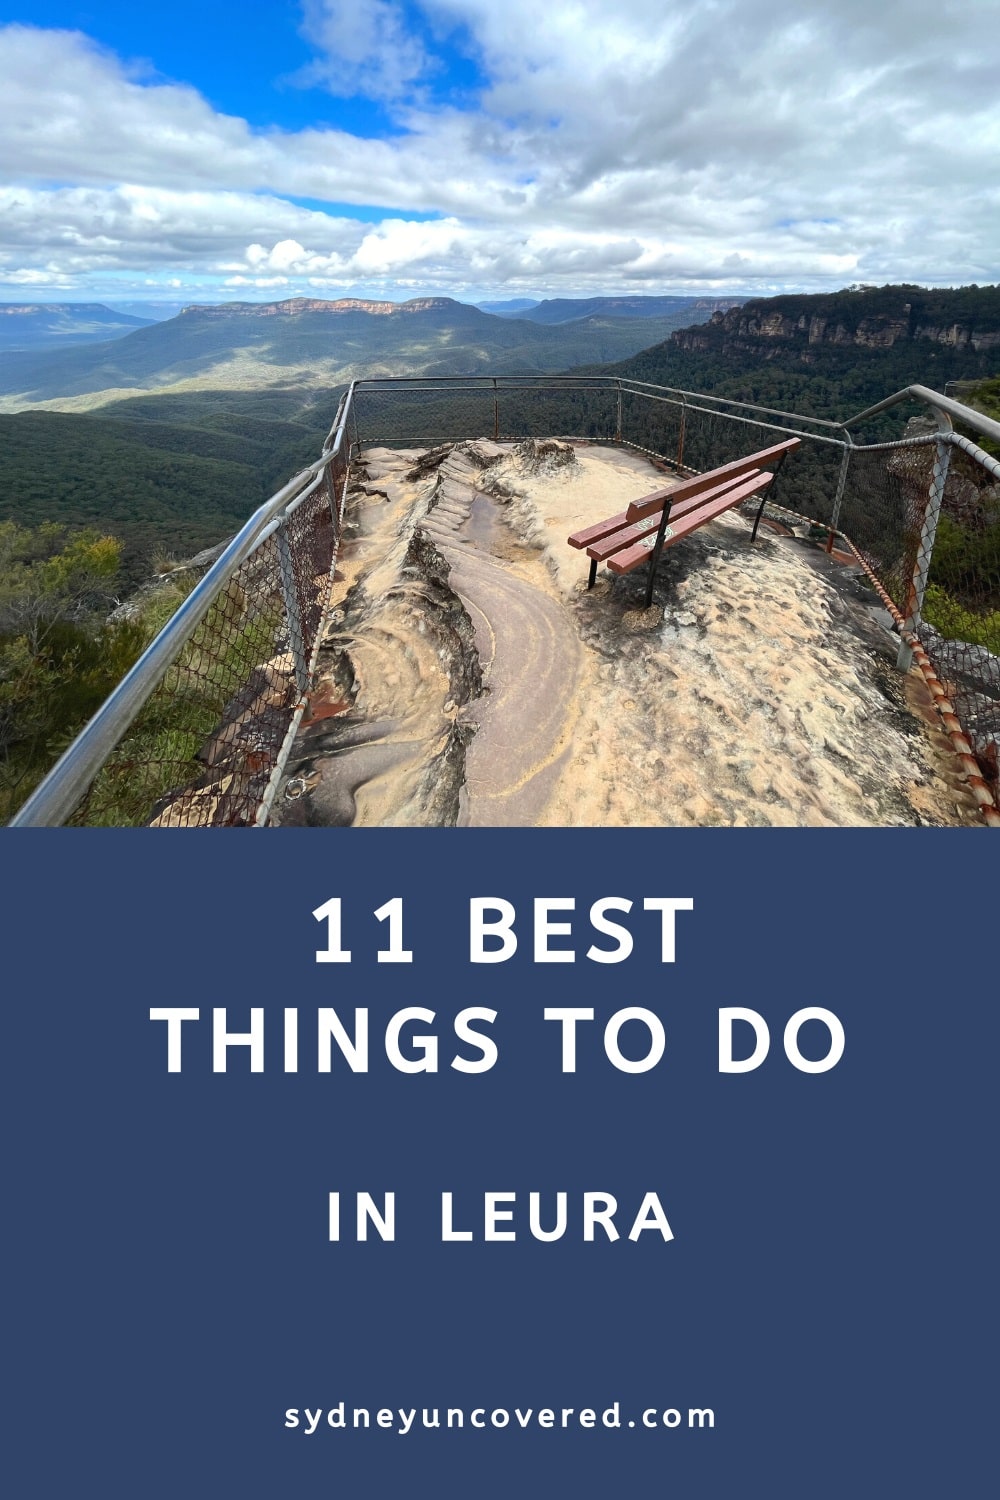 11 Best things to do in Leura